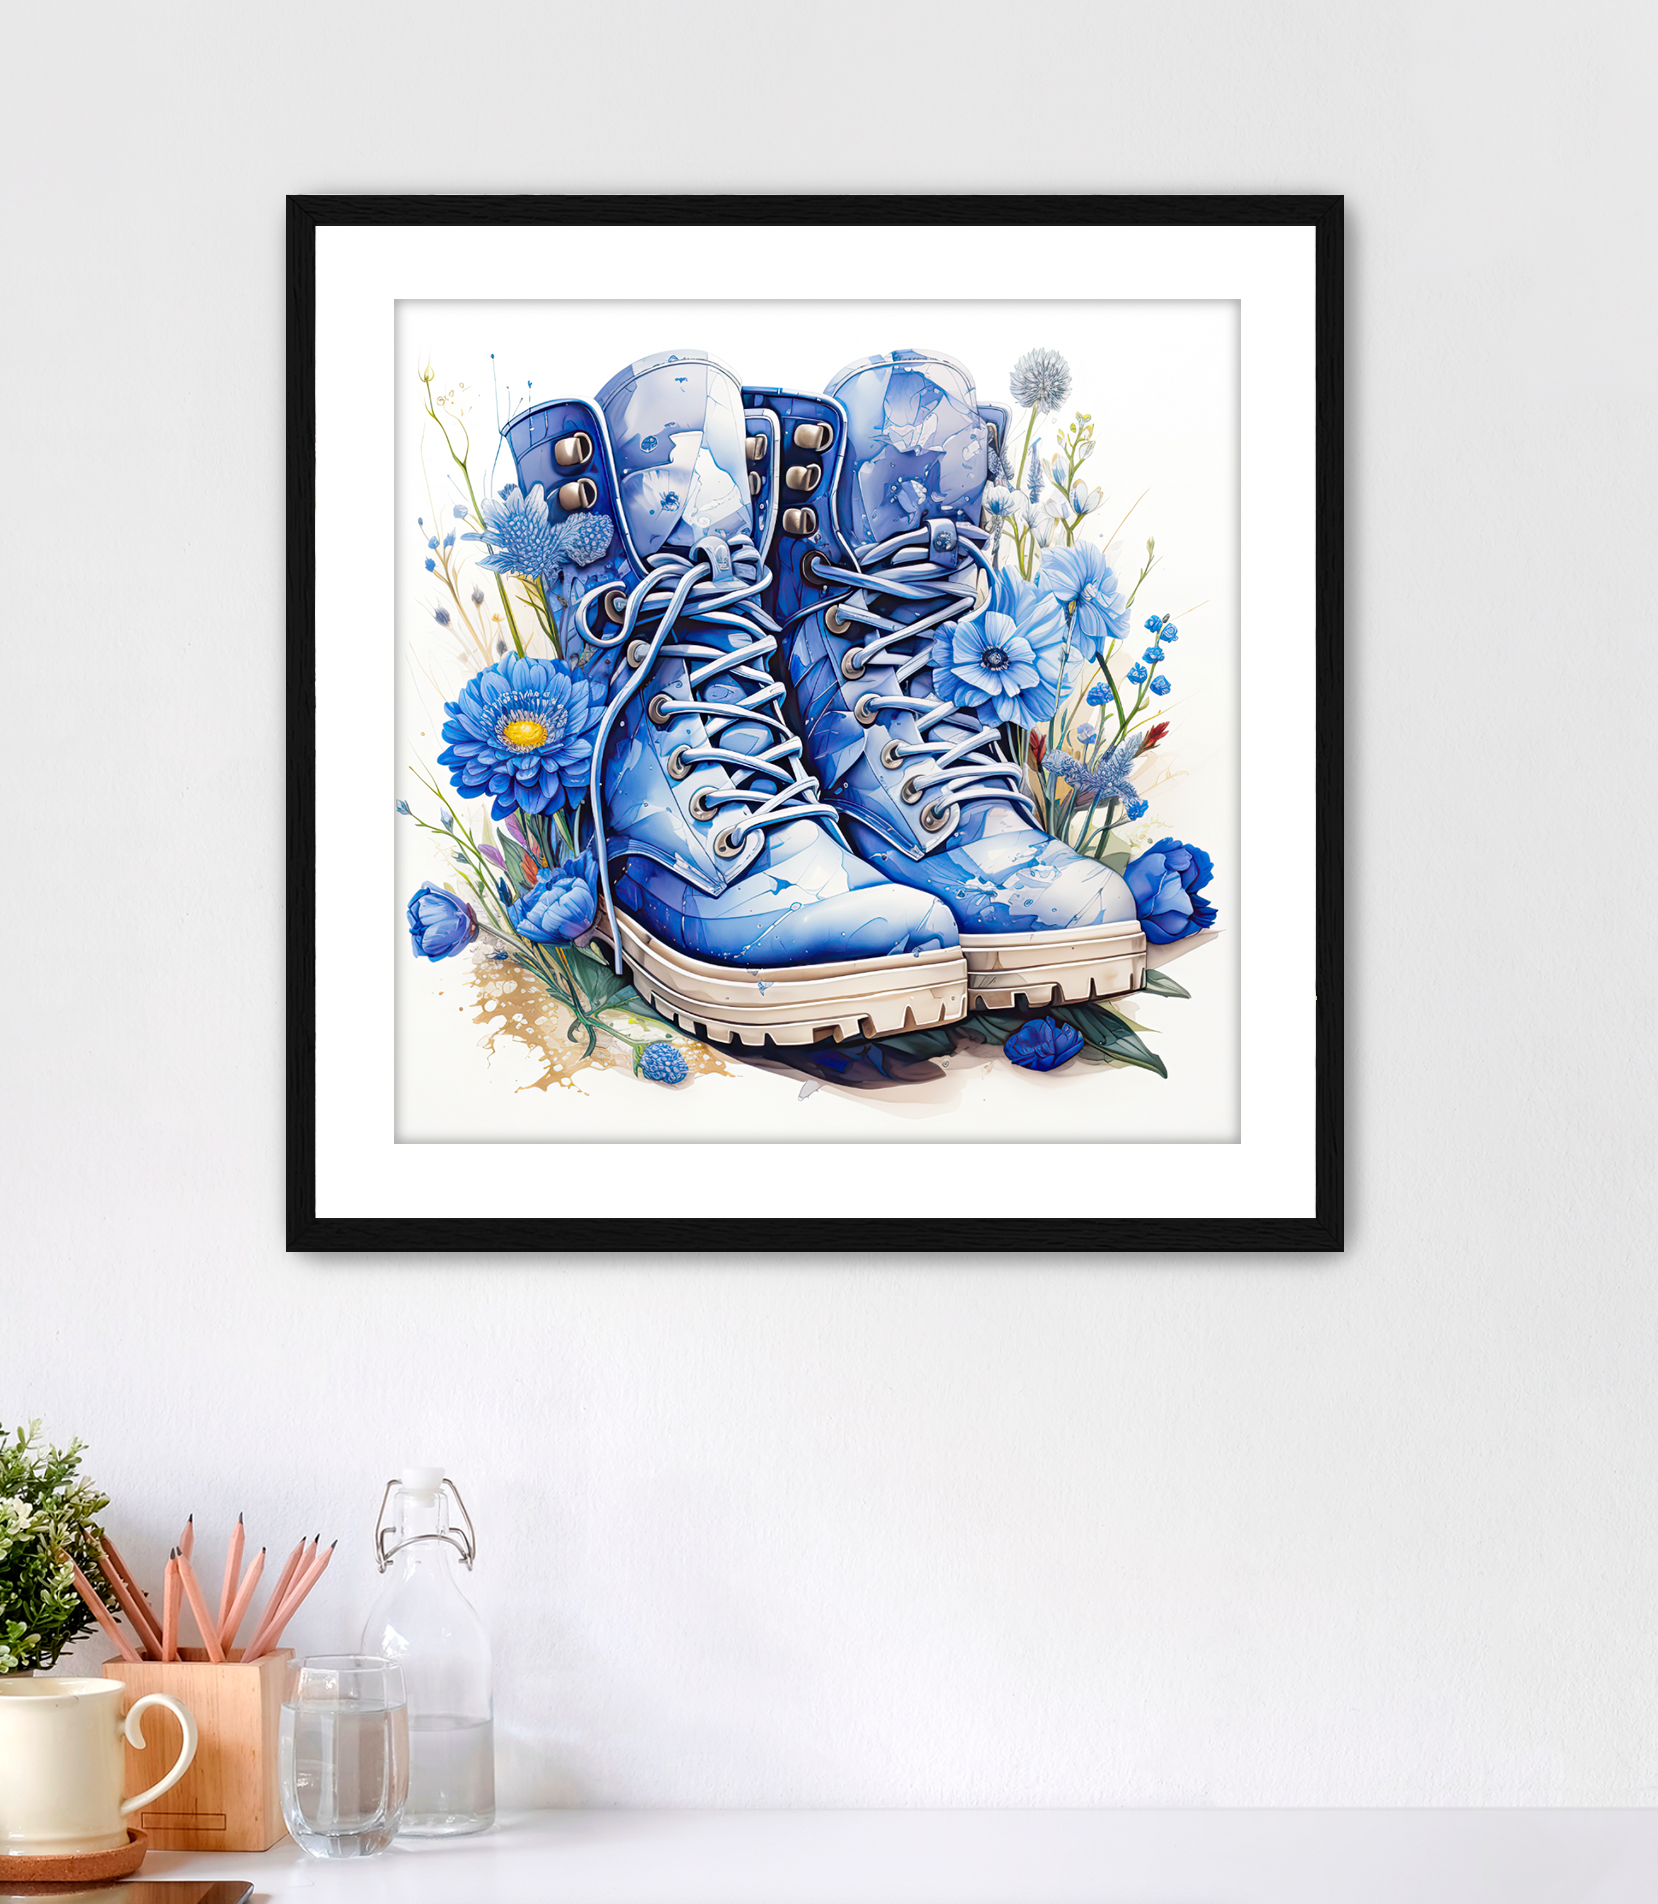 Adorable Framed Fine Art Print. The artwork features watercolor style blue hiking boots surrounded in blue wildflowers. A great gift for women hiking or gardening enthusiasts. Art comes with white mat and black frame. This wall art is for sale at customconcepts.art